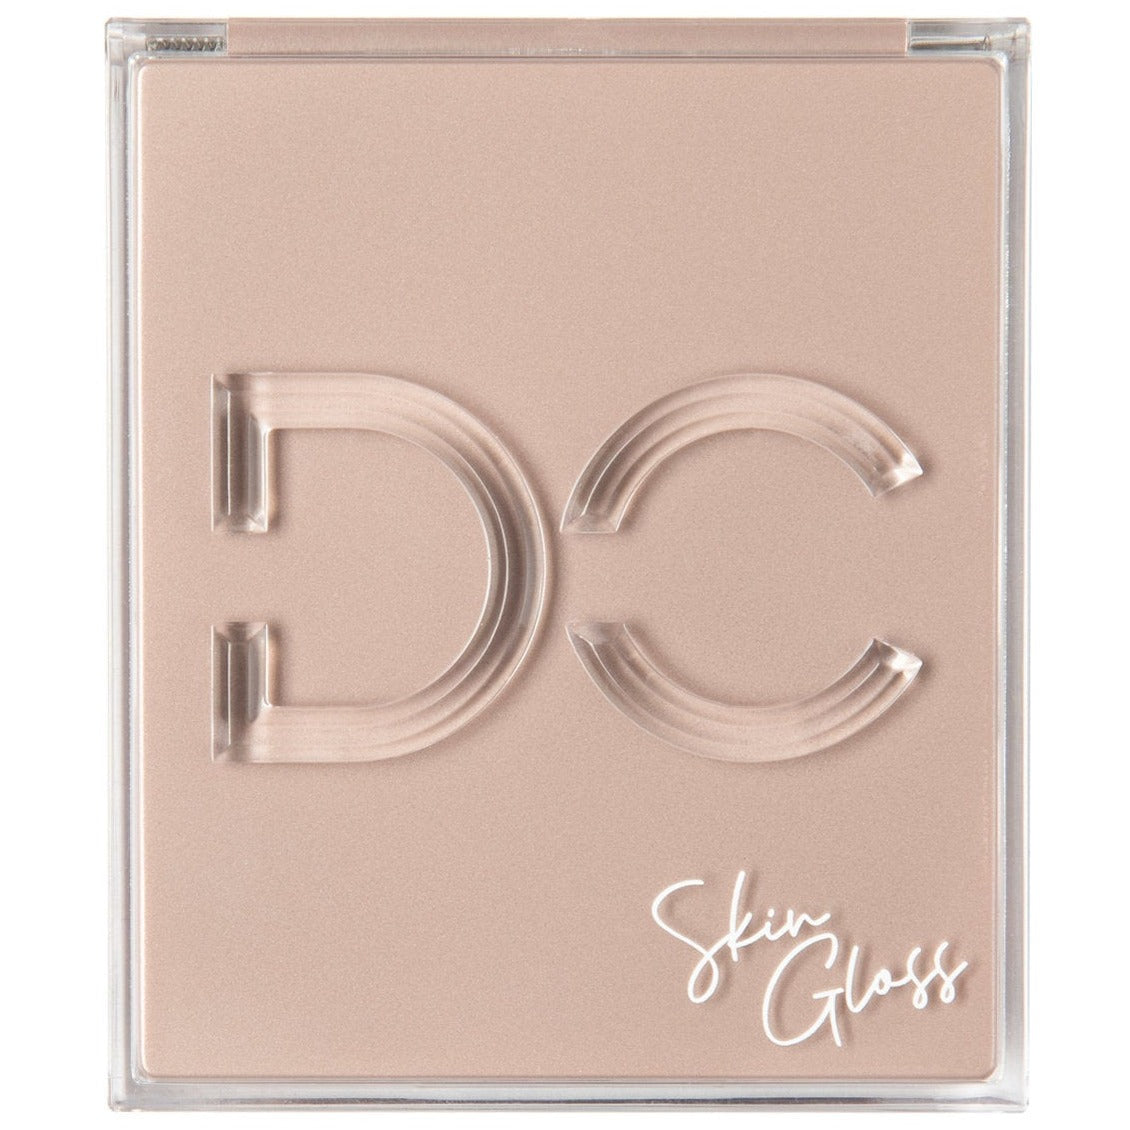 dominique cosmetic skin gloss works as an anti aging highlighting skin cream providing light reflecting pigments distracting from facial wrinkles giving the skin a moisturized appearance and feel for 24 hours